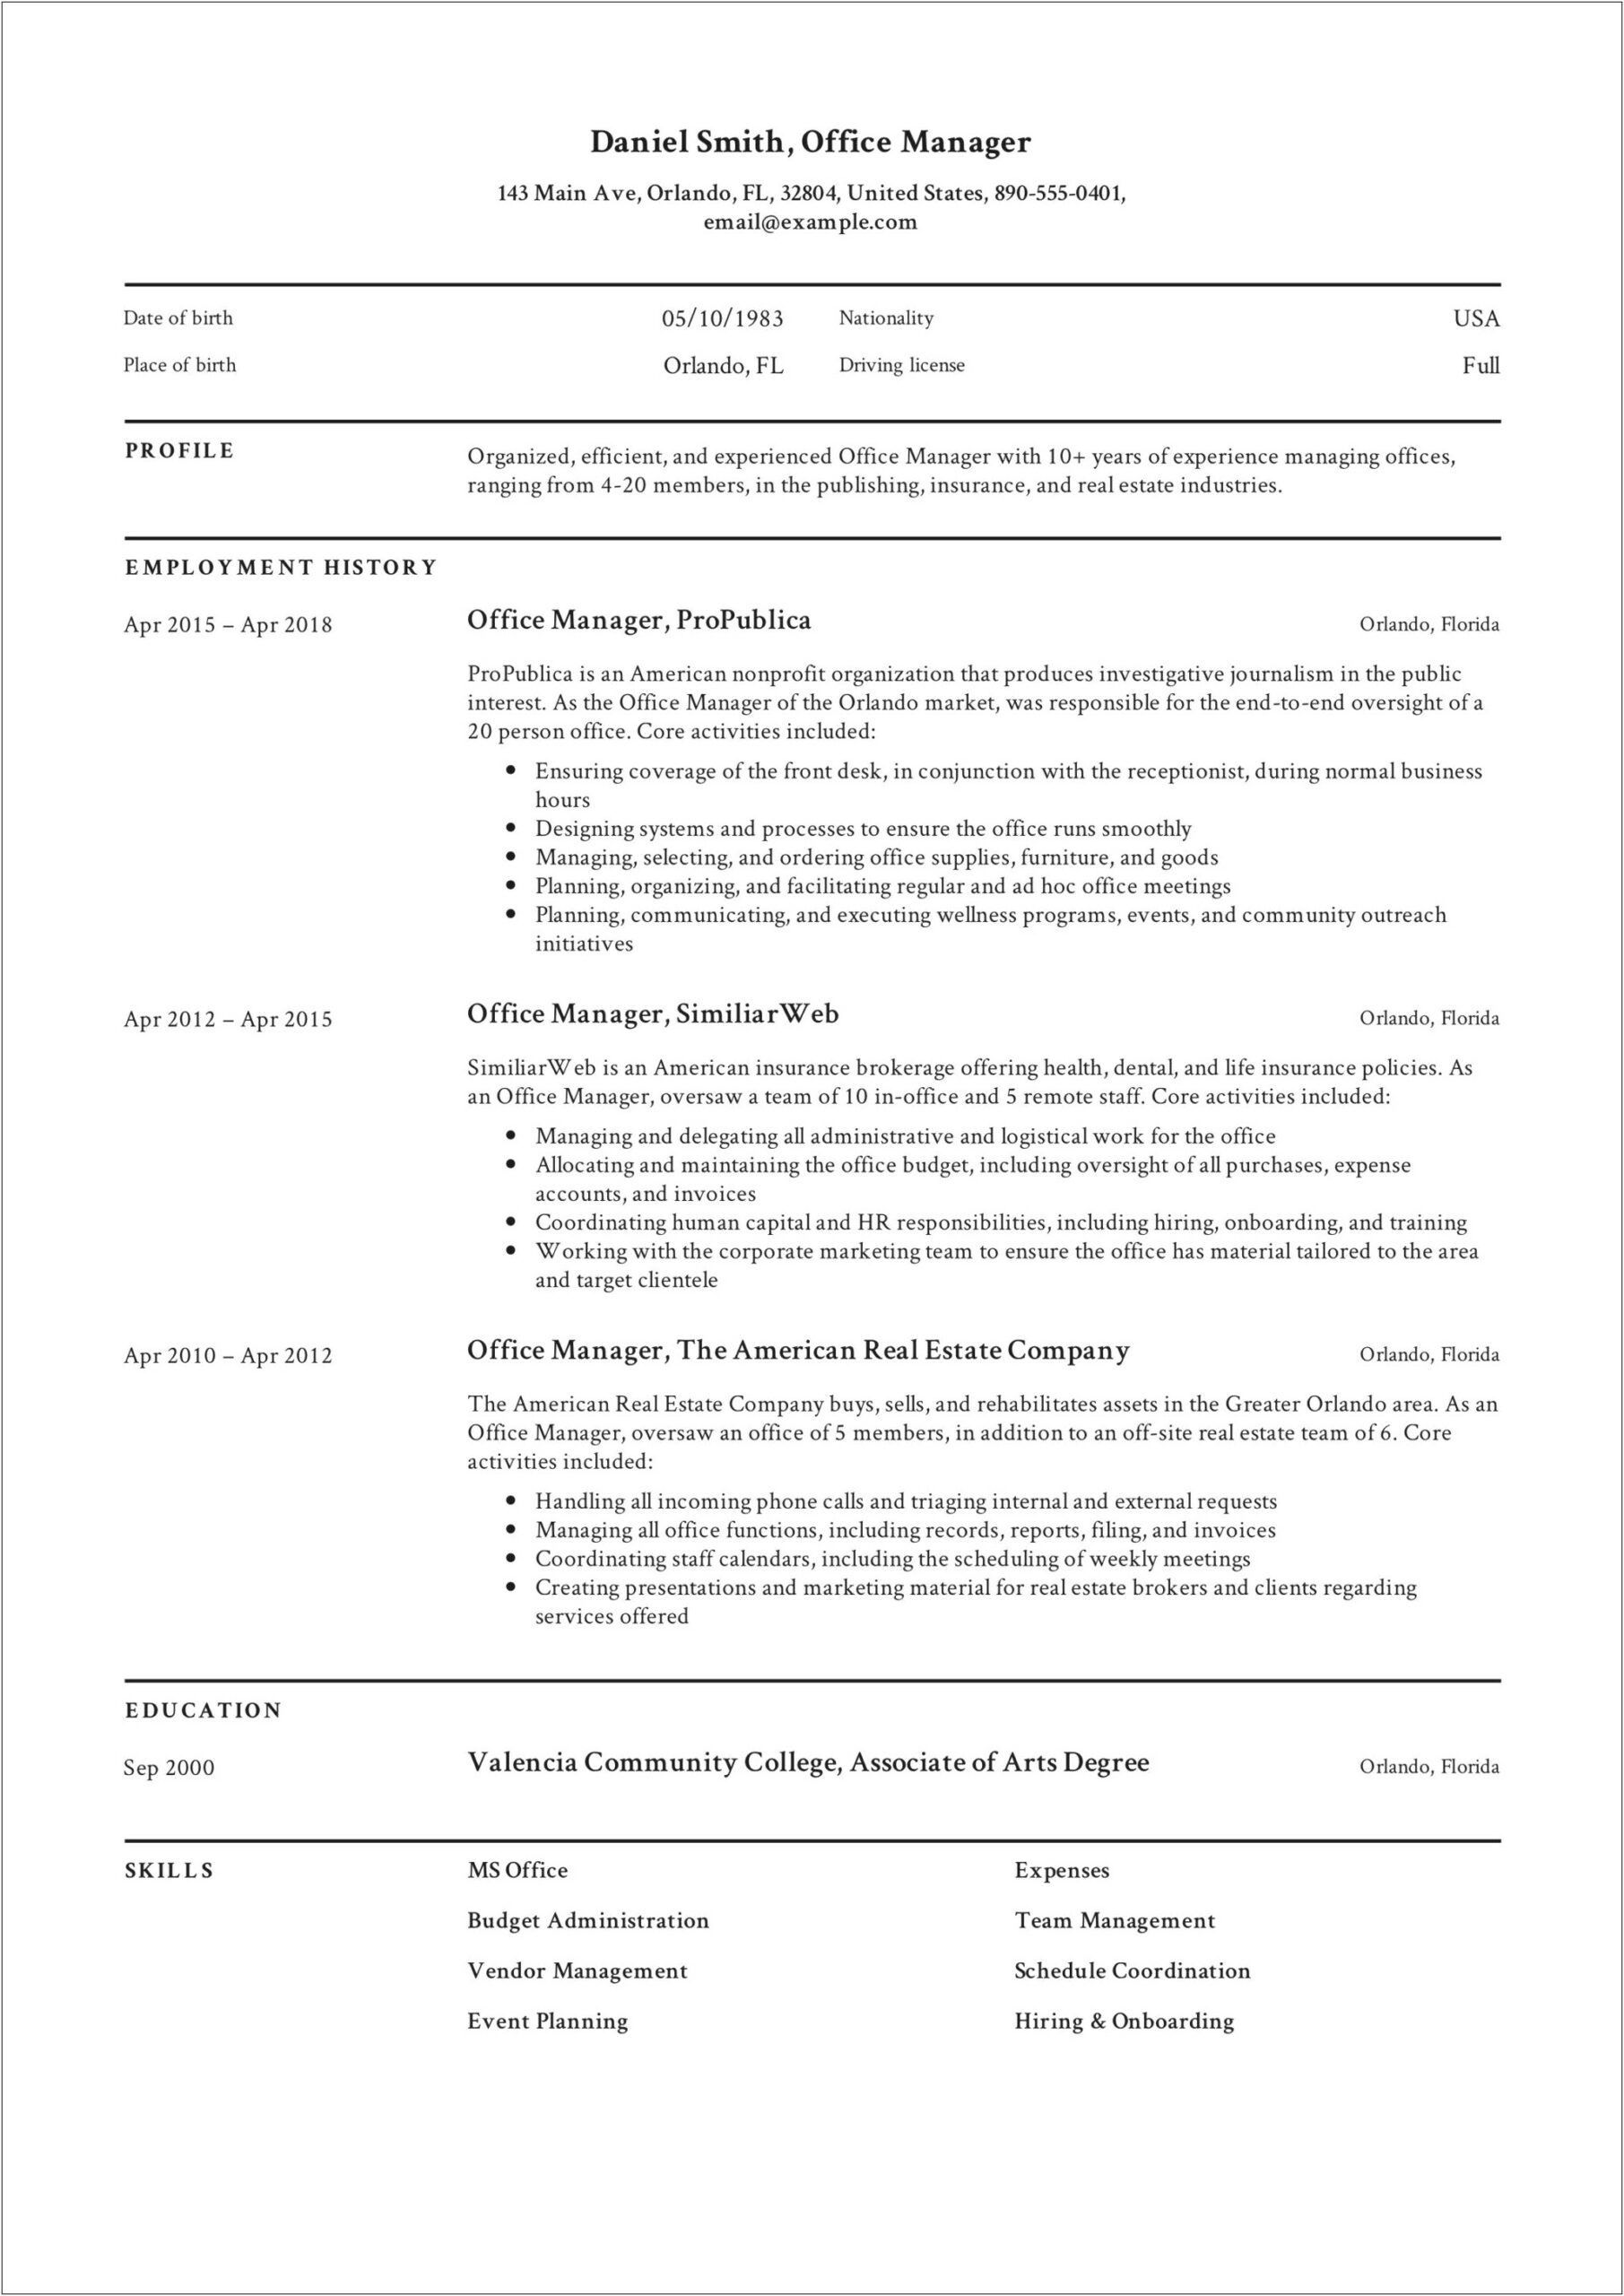 Resume For Office Manager For Construction Company